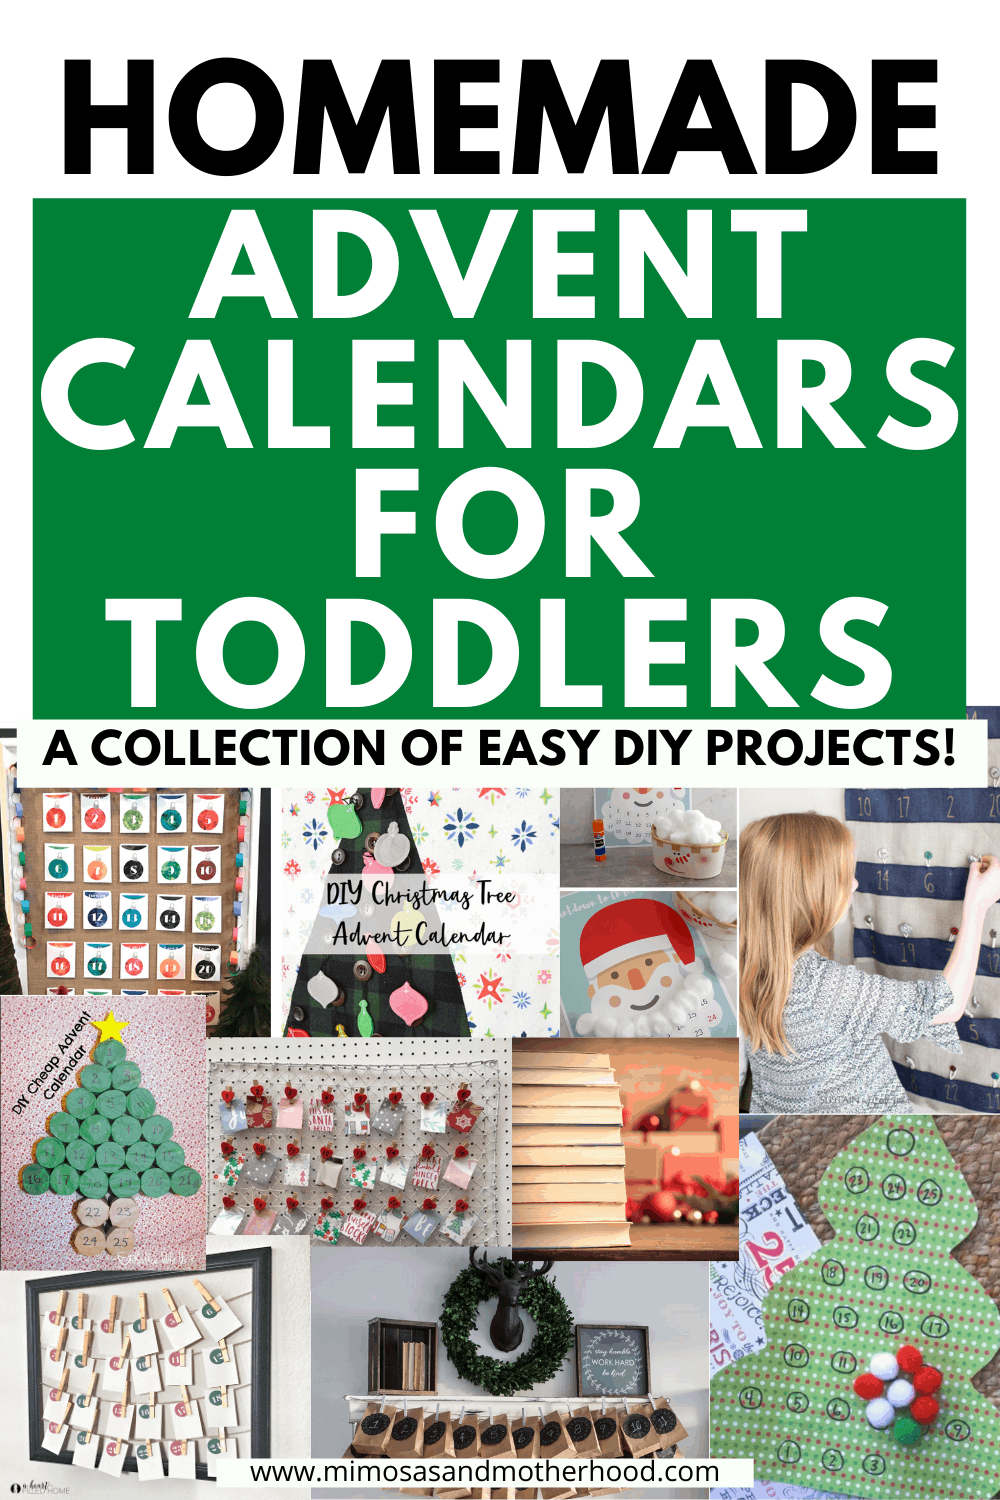 Homemade Advent Calendars for Toddlers